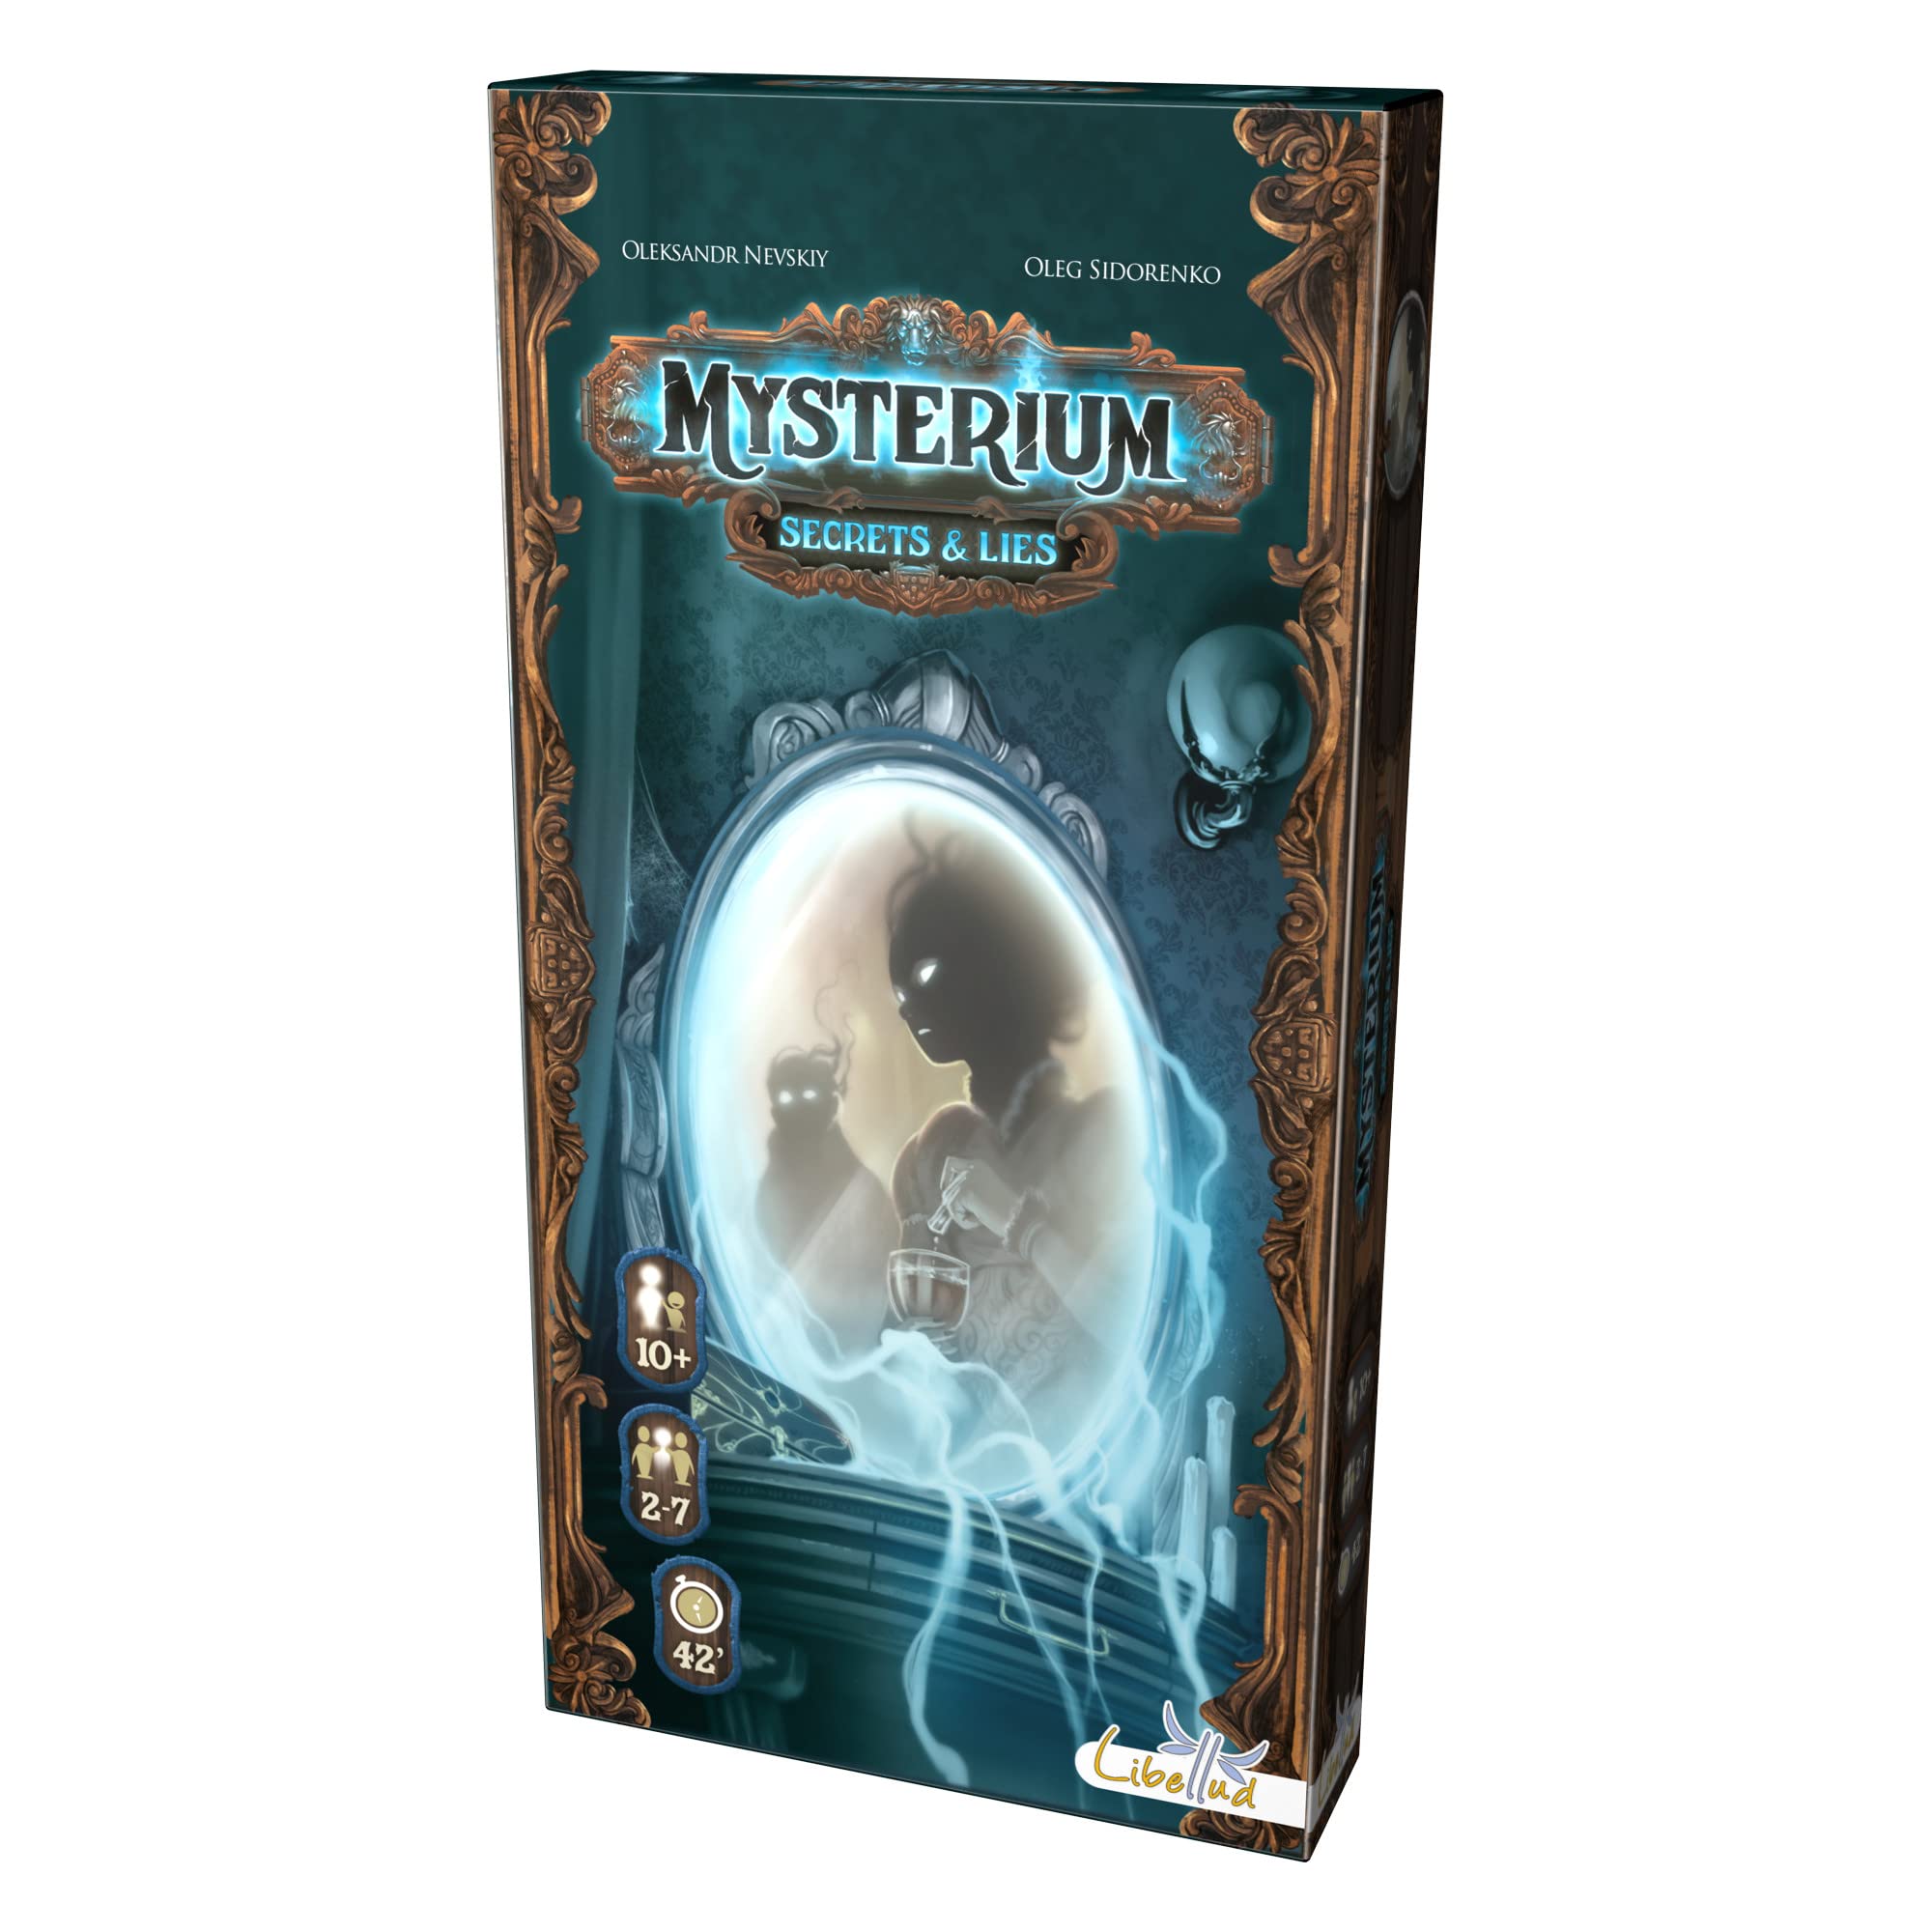 Libellud Mysterium Secrets & Lies Board Game Expansion - Enigmatic Cooperative Mystery Game with Ghostly Intrigue, Fun for Family Game Night, Ages 10+, 2-7 Players, 45 Minute Playtime, Made